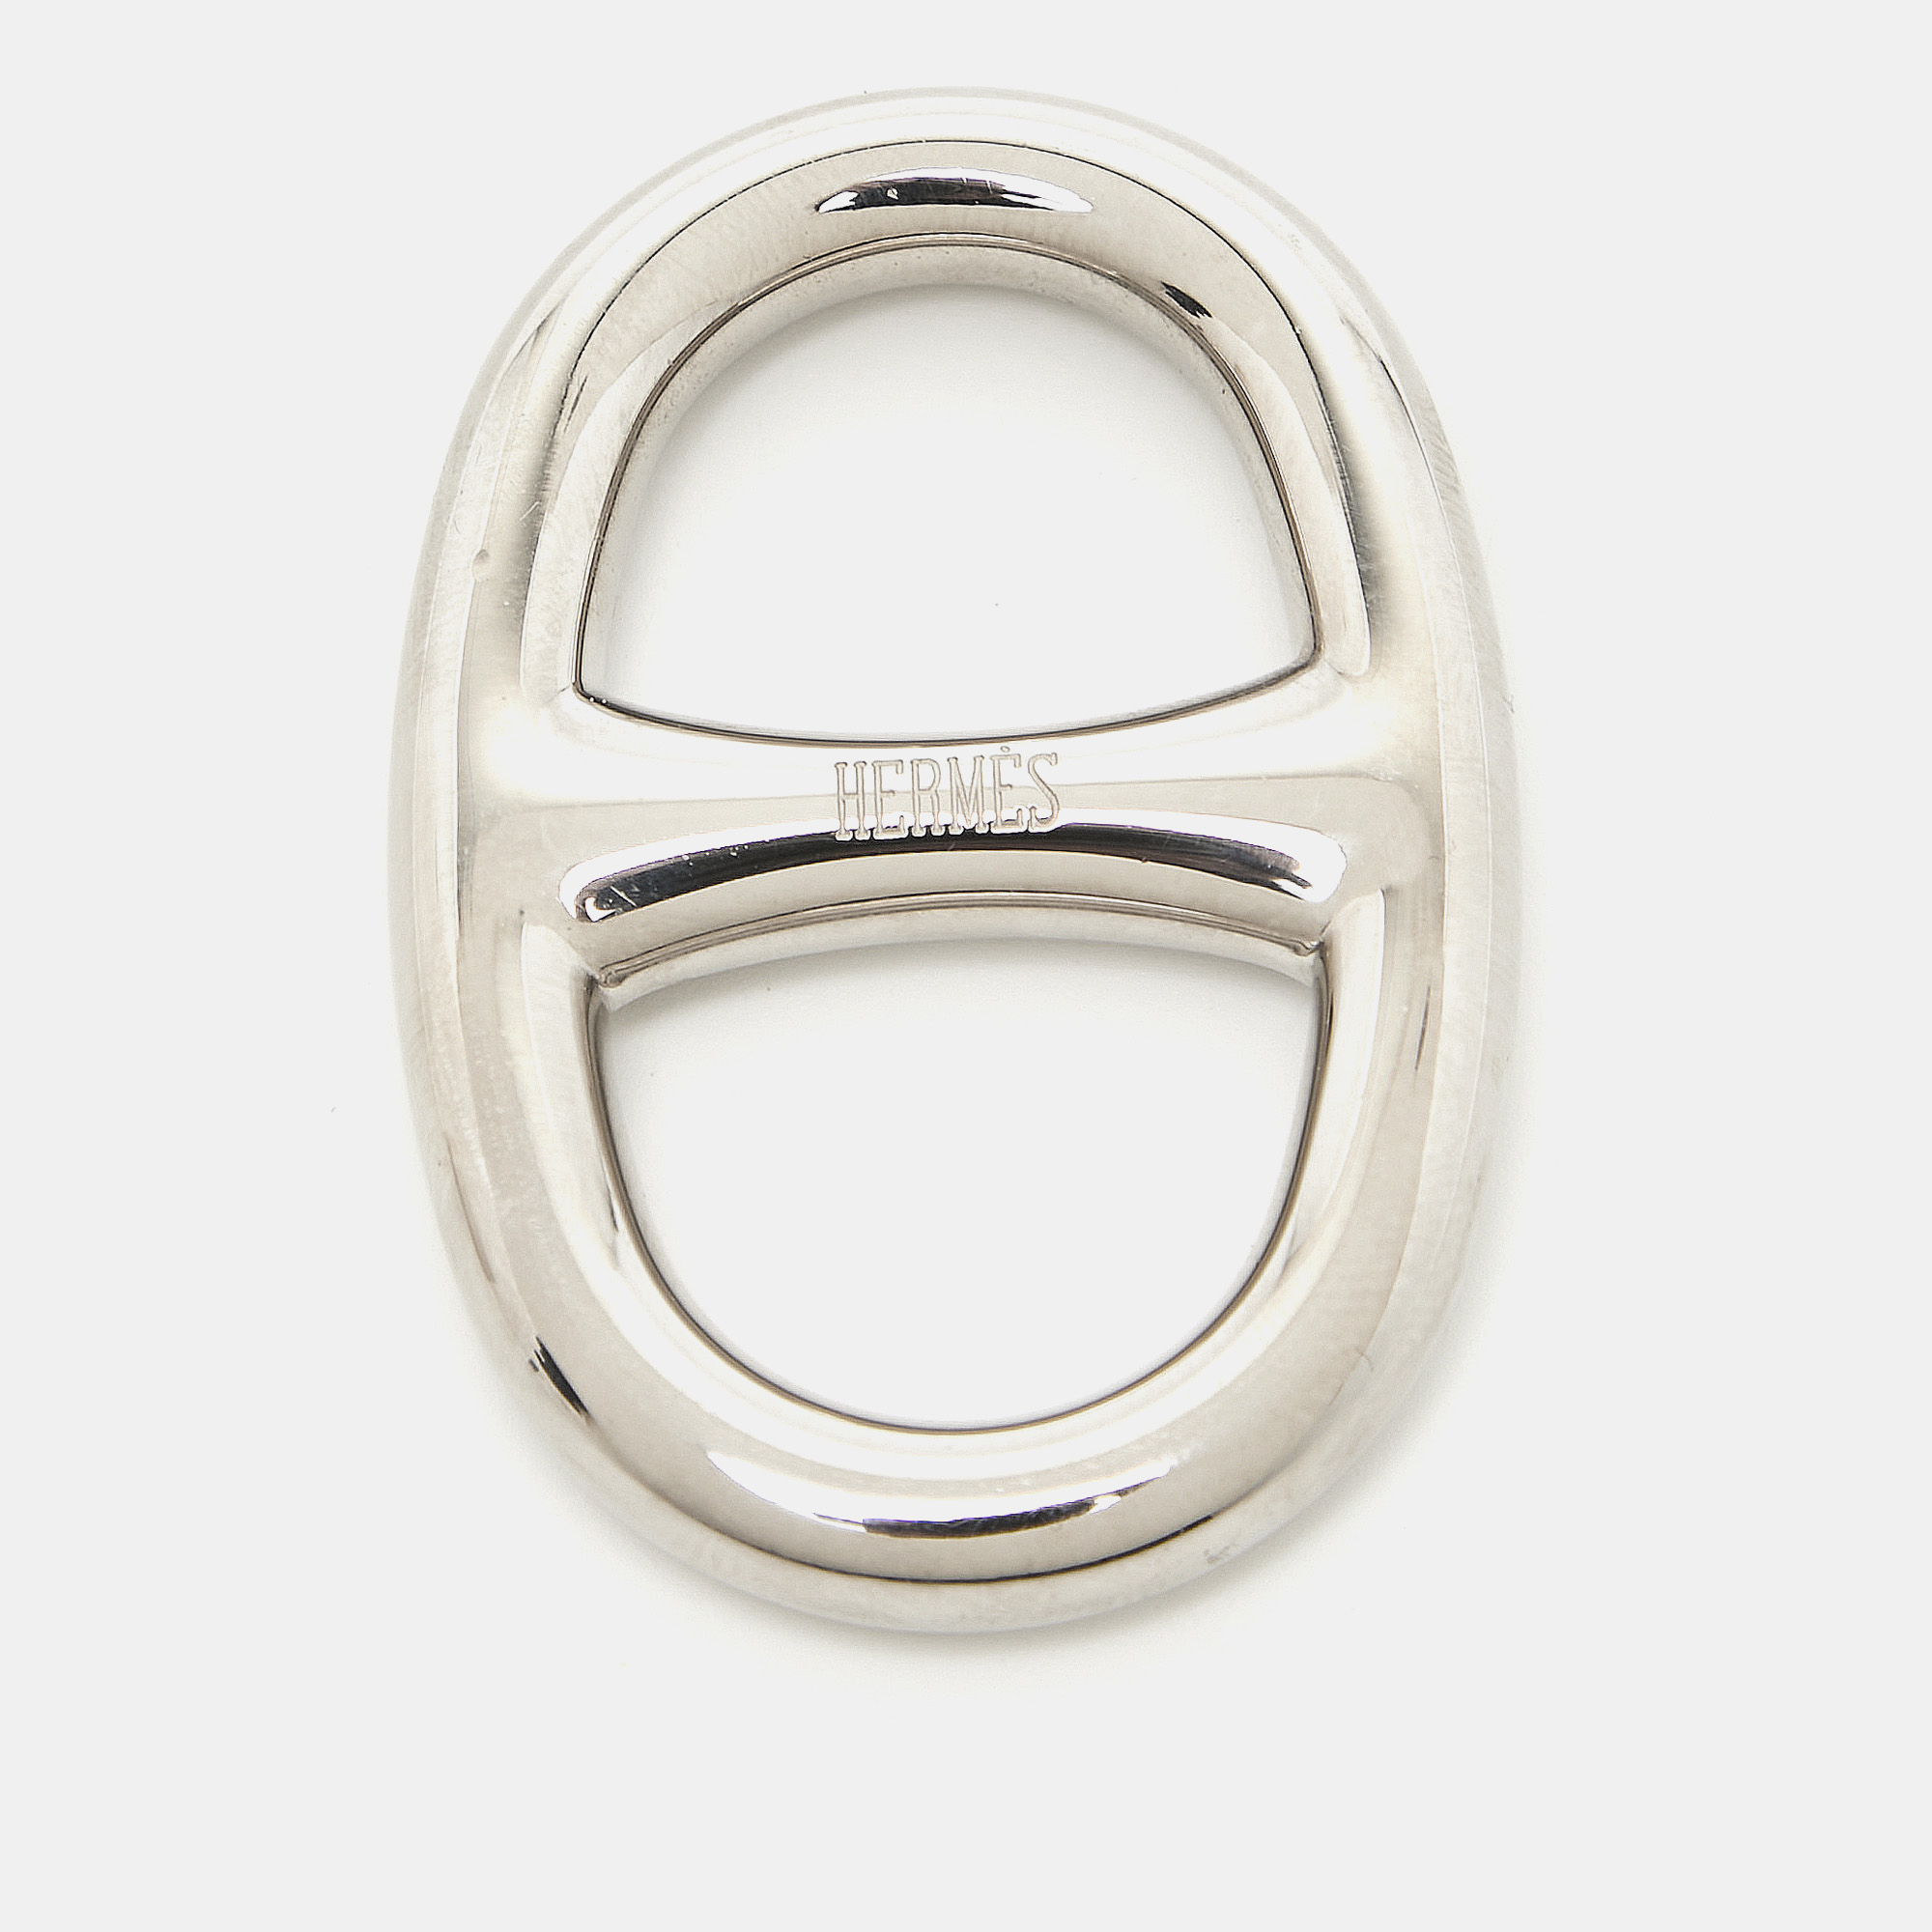 Hermes herm&egrave;s chaine d'ancre silver tone scarf ring